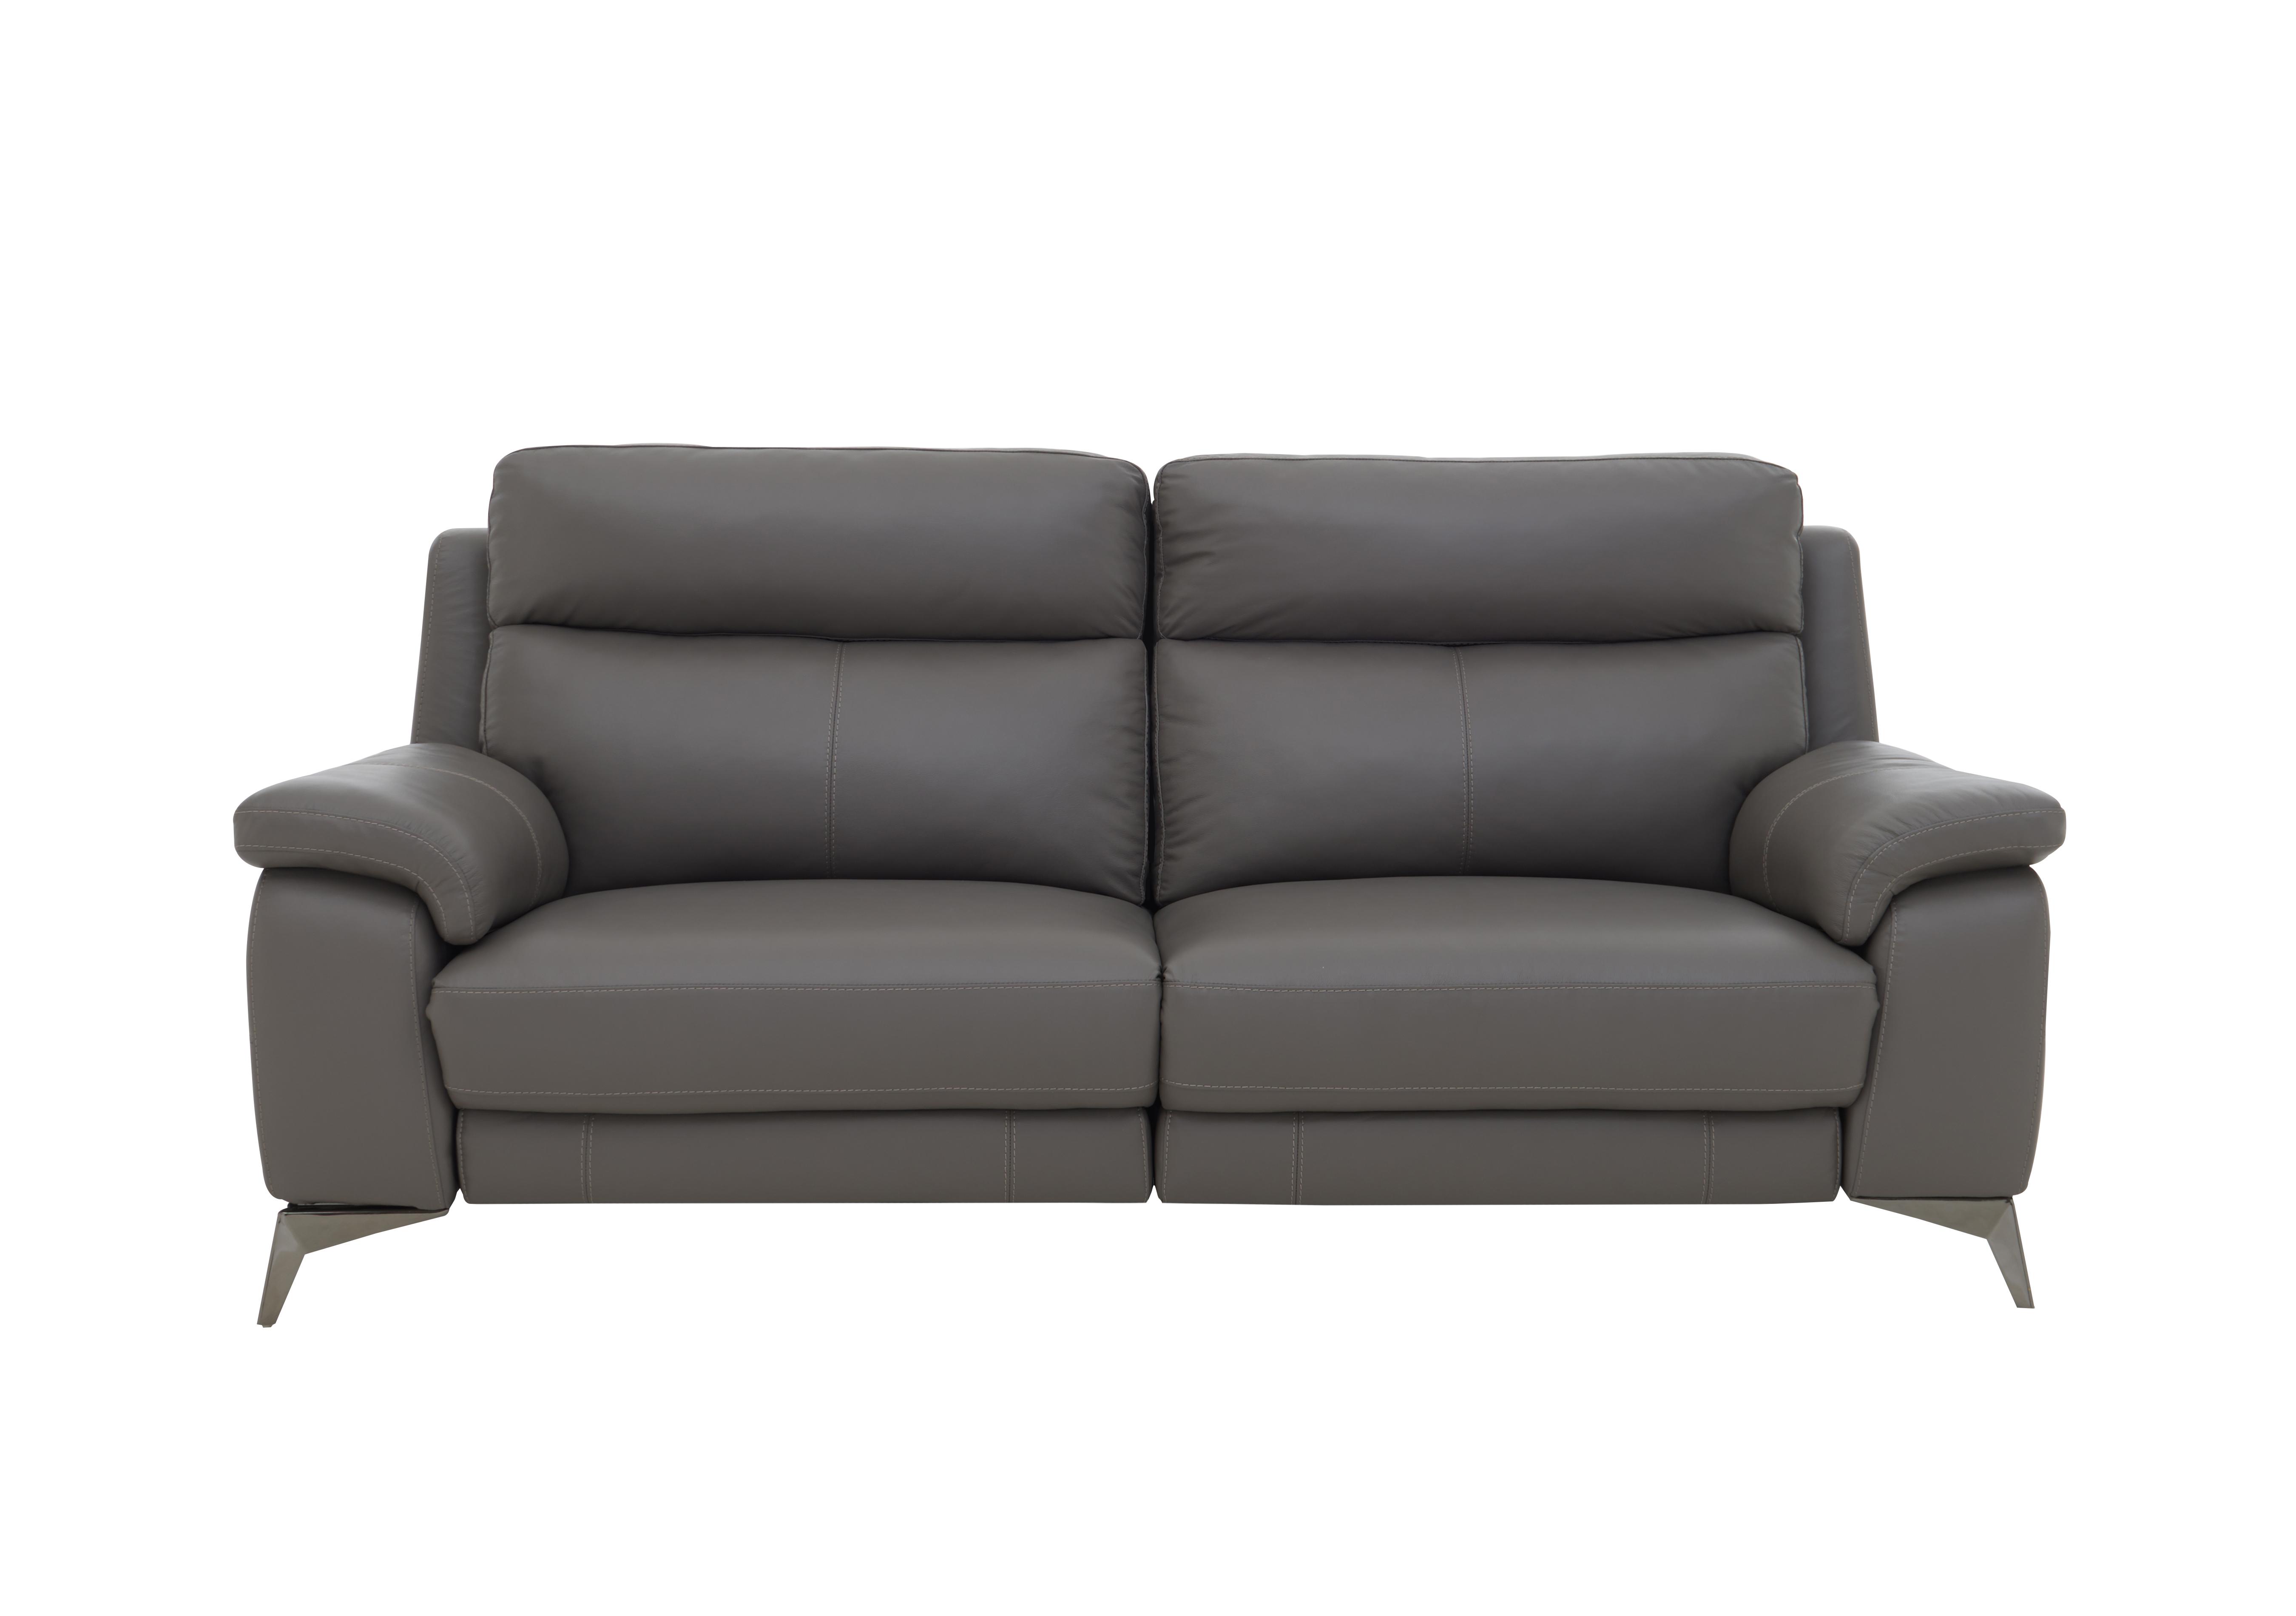 Missouri 3 Seater Leather Recliner Sofa with Power Headrest in Bv-042e Elephant on Furniture Village